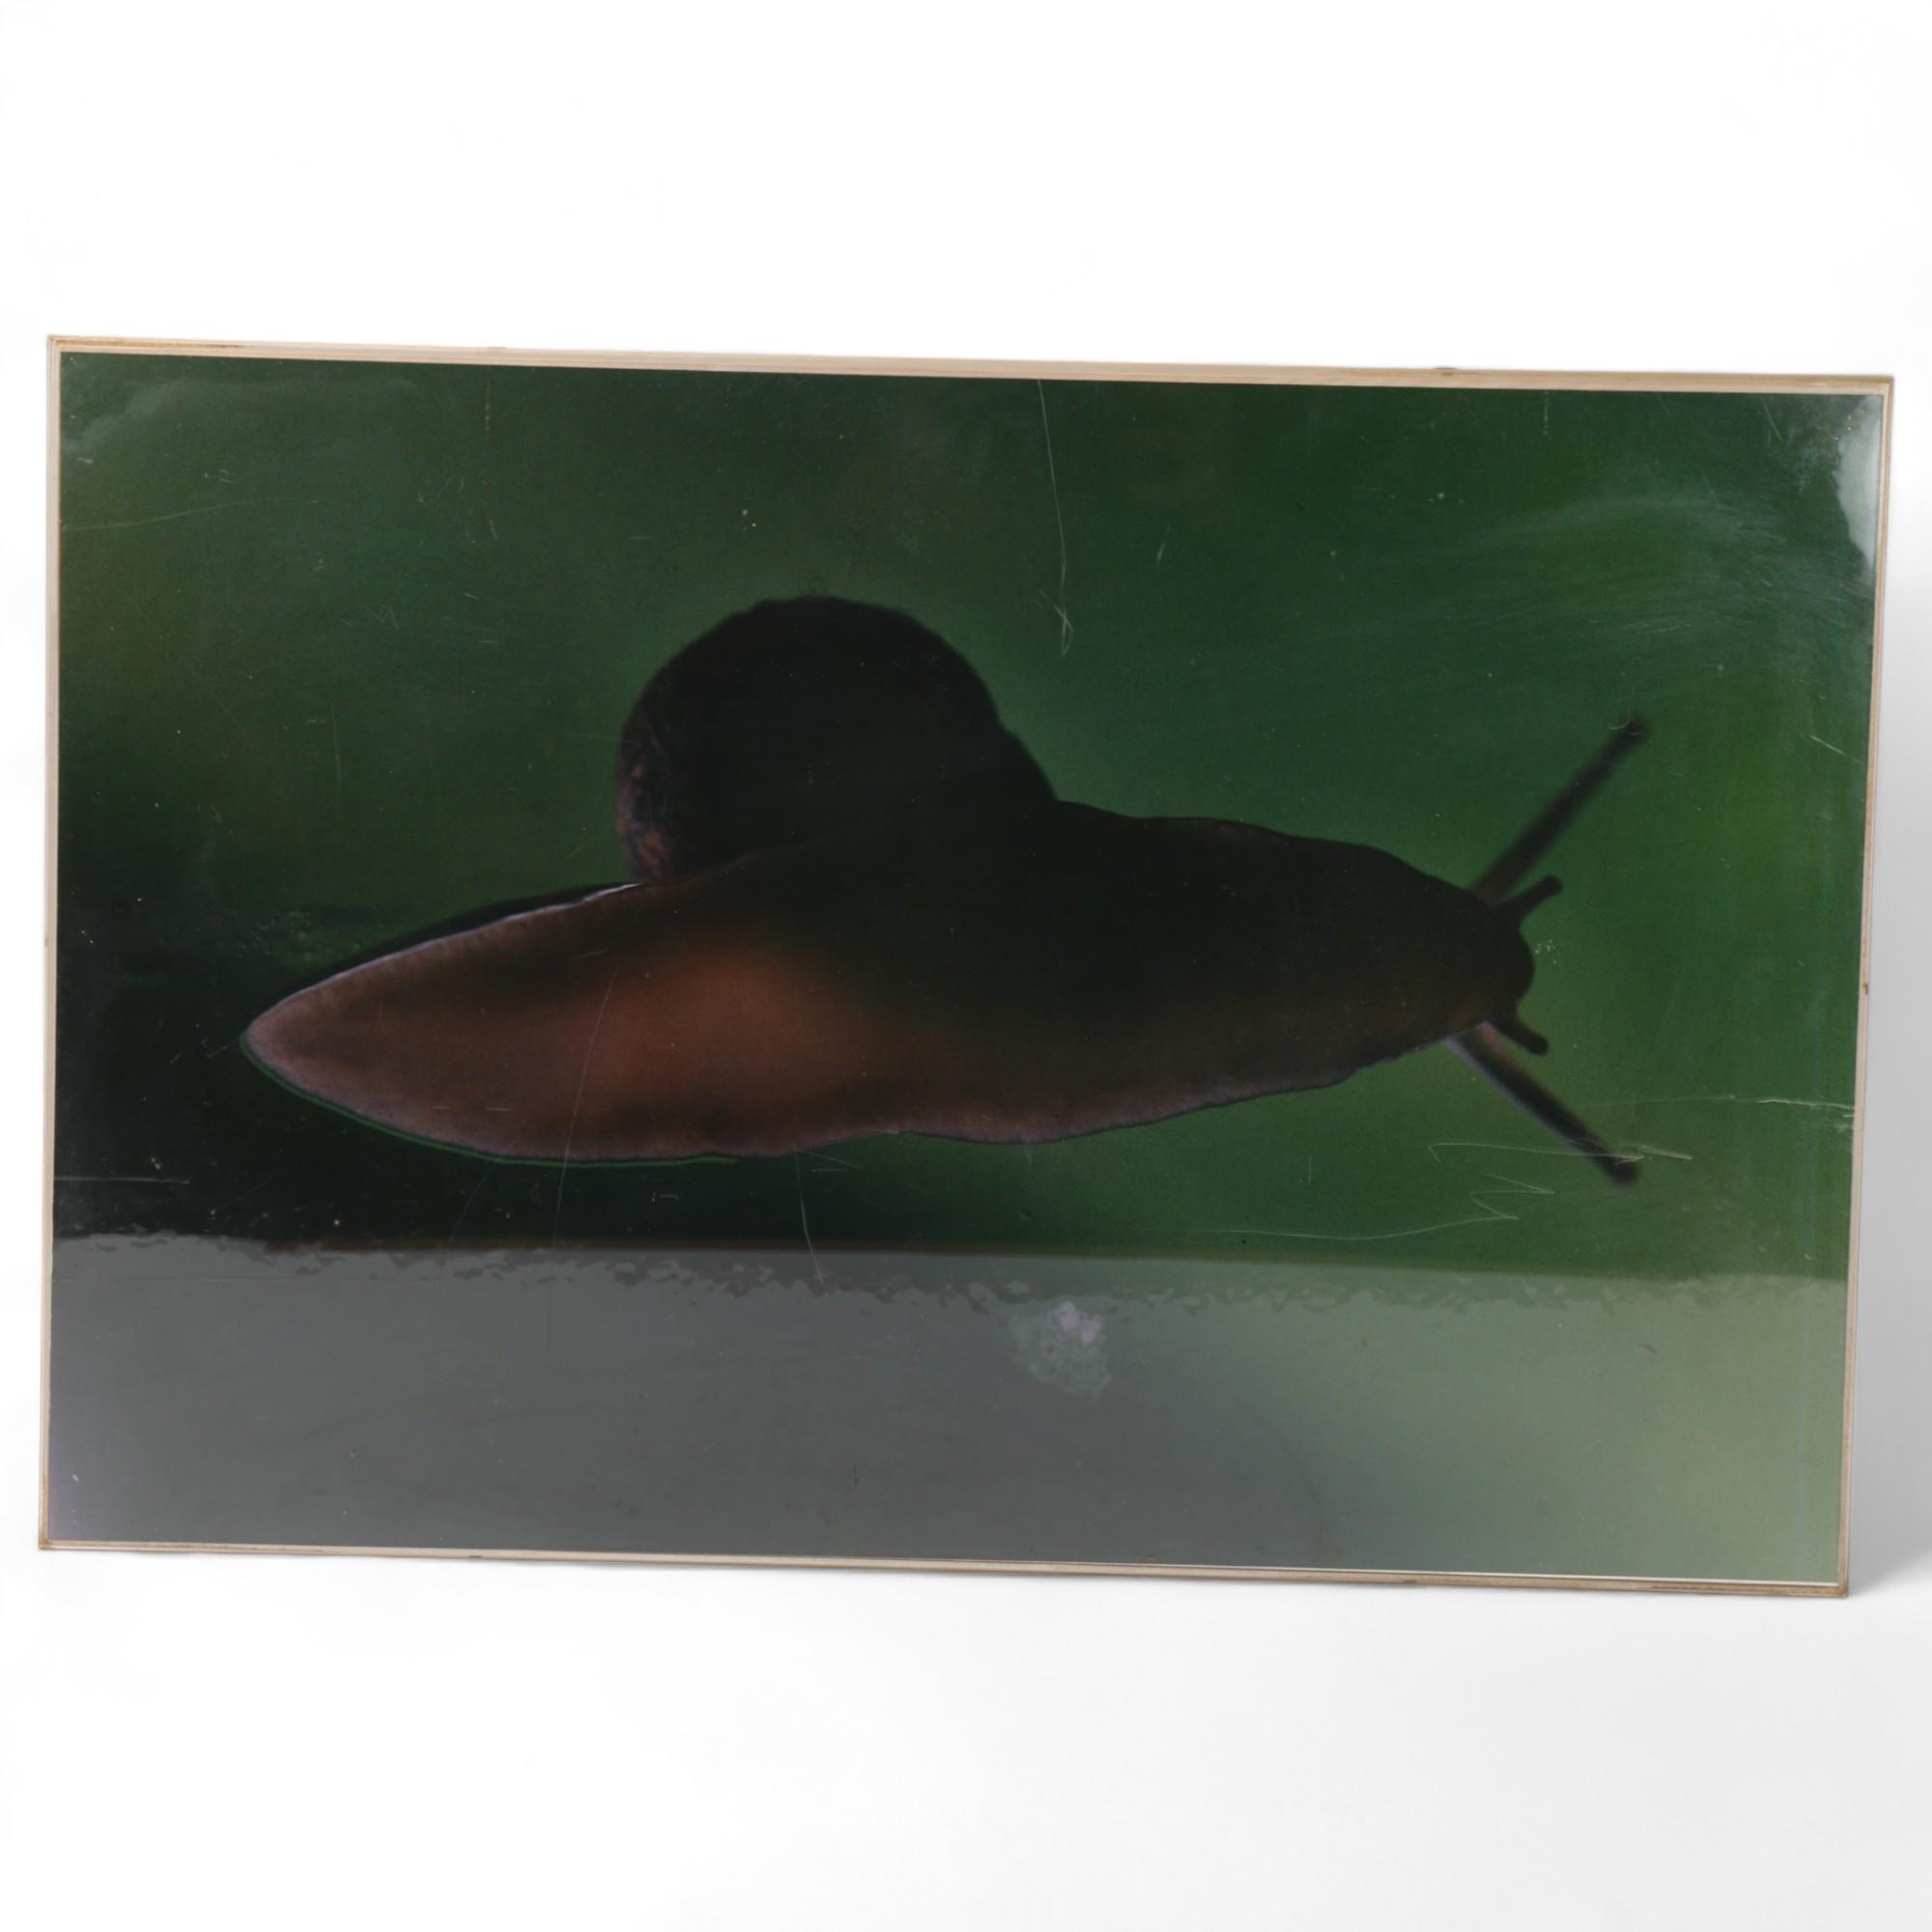 LINDA MCCARTNEY (1941-1998), a photographic print of the underside of a snail, signed "for Mr Bee